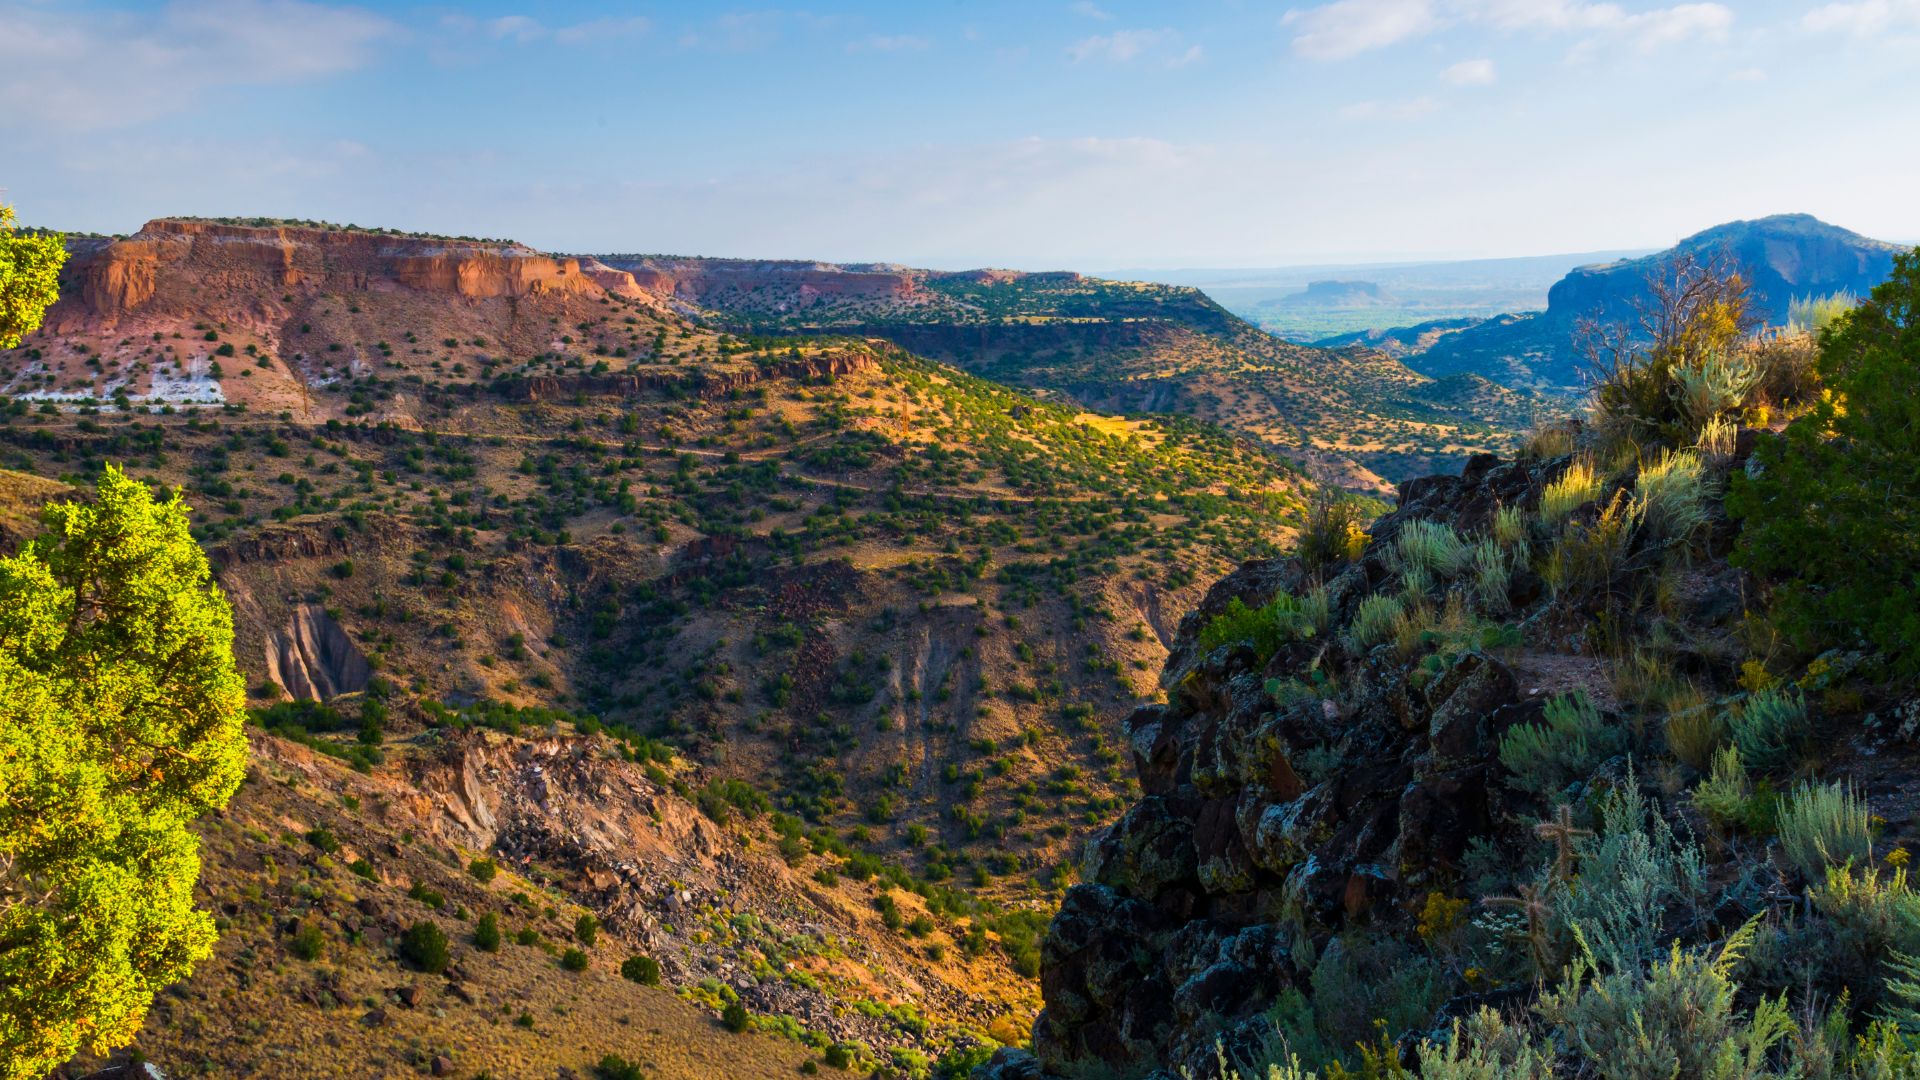 A scenic view of the rocky canyons at White Rock Overlook outside of Santa Fe, New Mexico